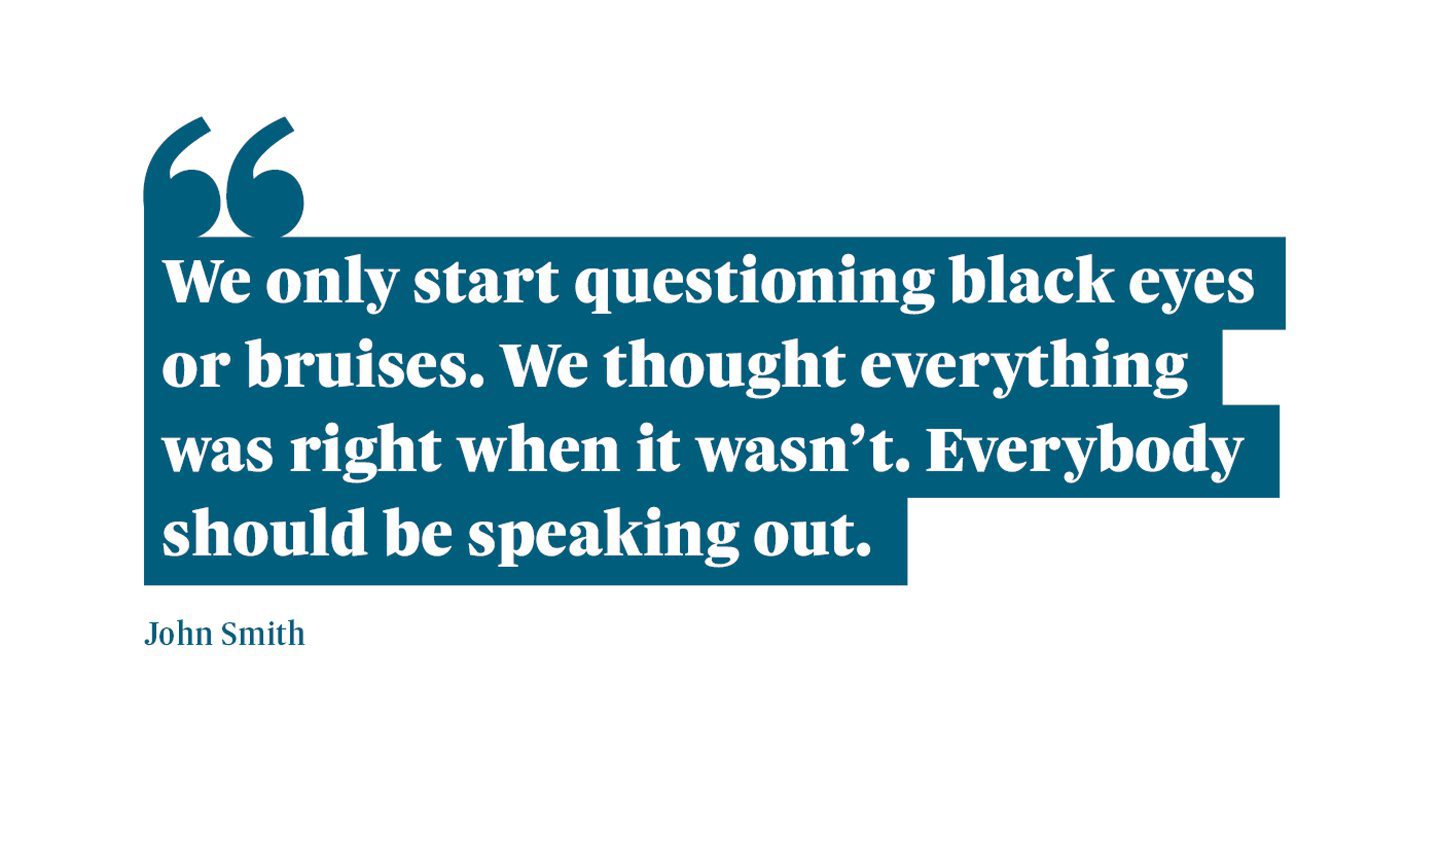 A quote from John Smith, Neomi's dad. It says: “We only start questioning black eyes or bruises. We thought everything was right when it wasn’t. “Everybody should be speaking out.”